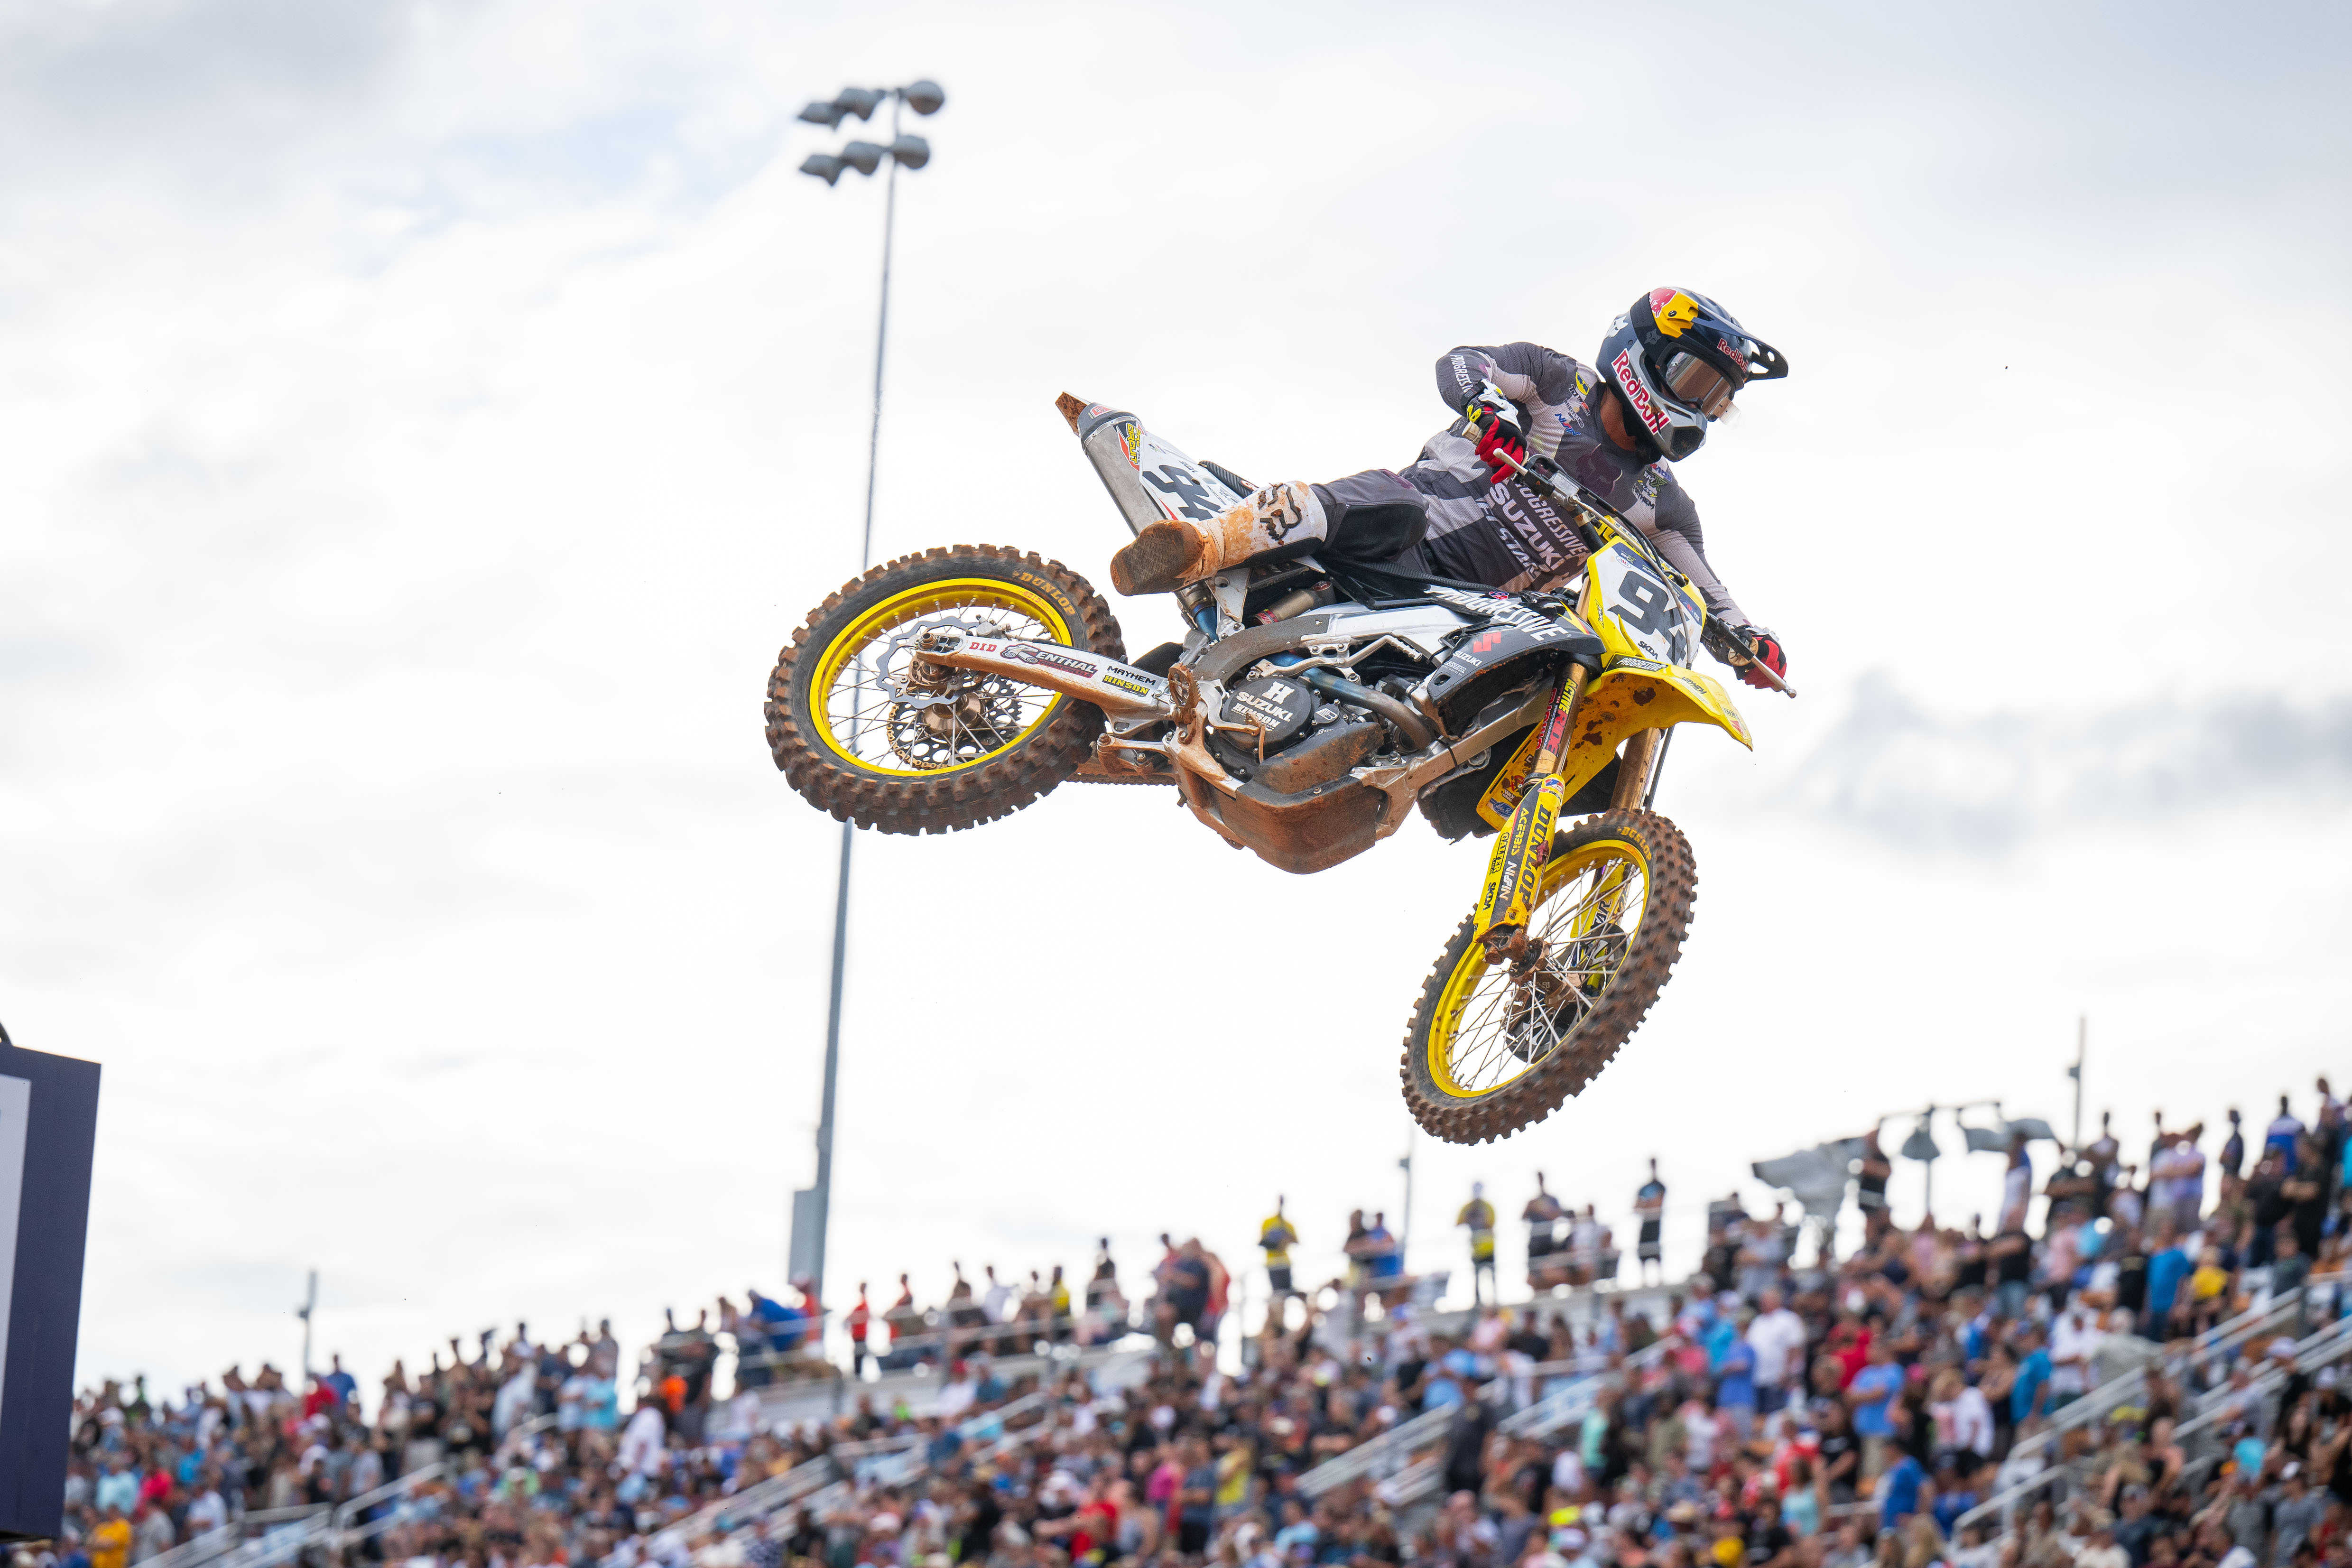 Ken Roczen led the early laps of the second moto in the 450 Class